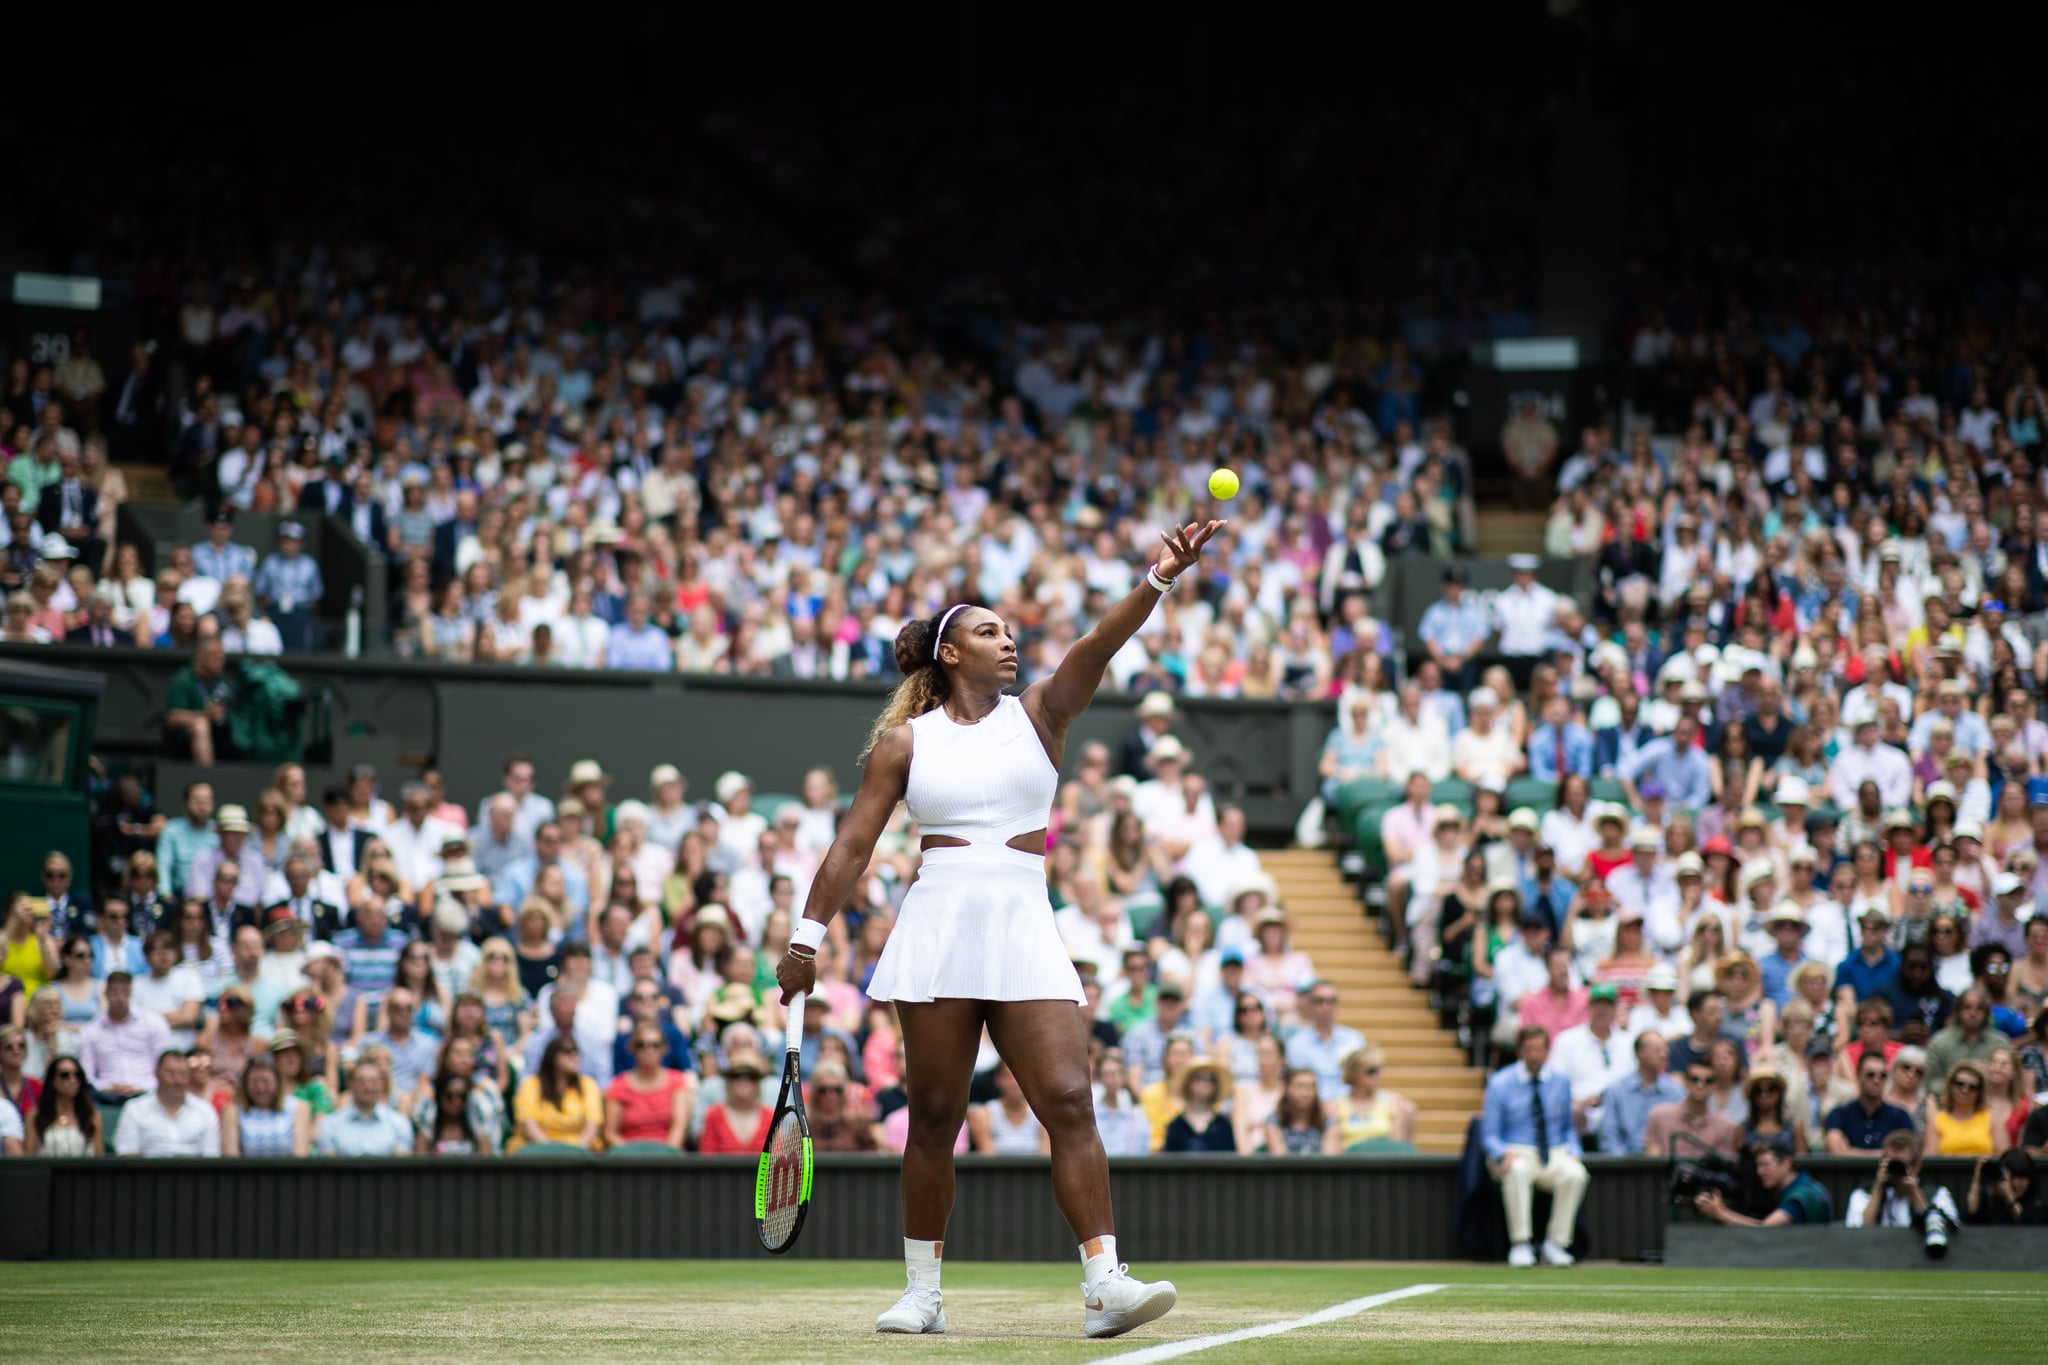 LONDON, ENGLAND - JULY 13: Serena Williams of USA in action during the Women's Singles Final against Simona Halep of Romania (not pictured) at The Wimbledon Lawn Tennis Championship at the All England Lawn and Tennis Club at Wimbledon on July 13, 2019 in London, England. (Photo by Simon Bruty/Anychance/Getty Images)